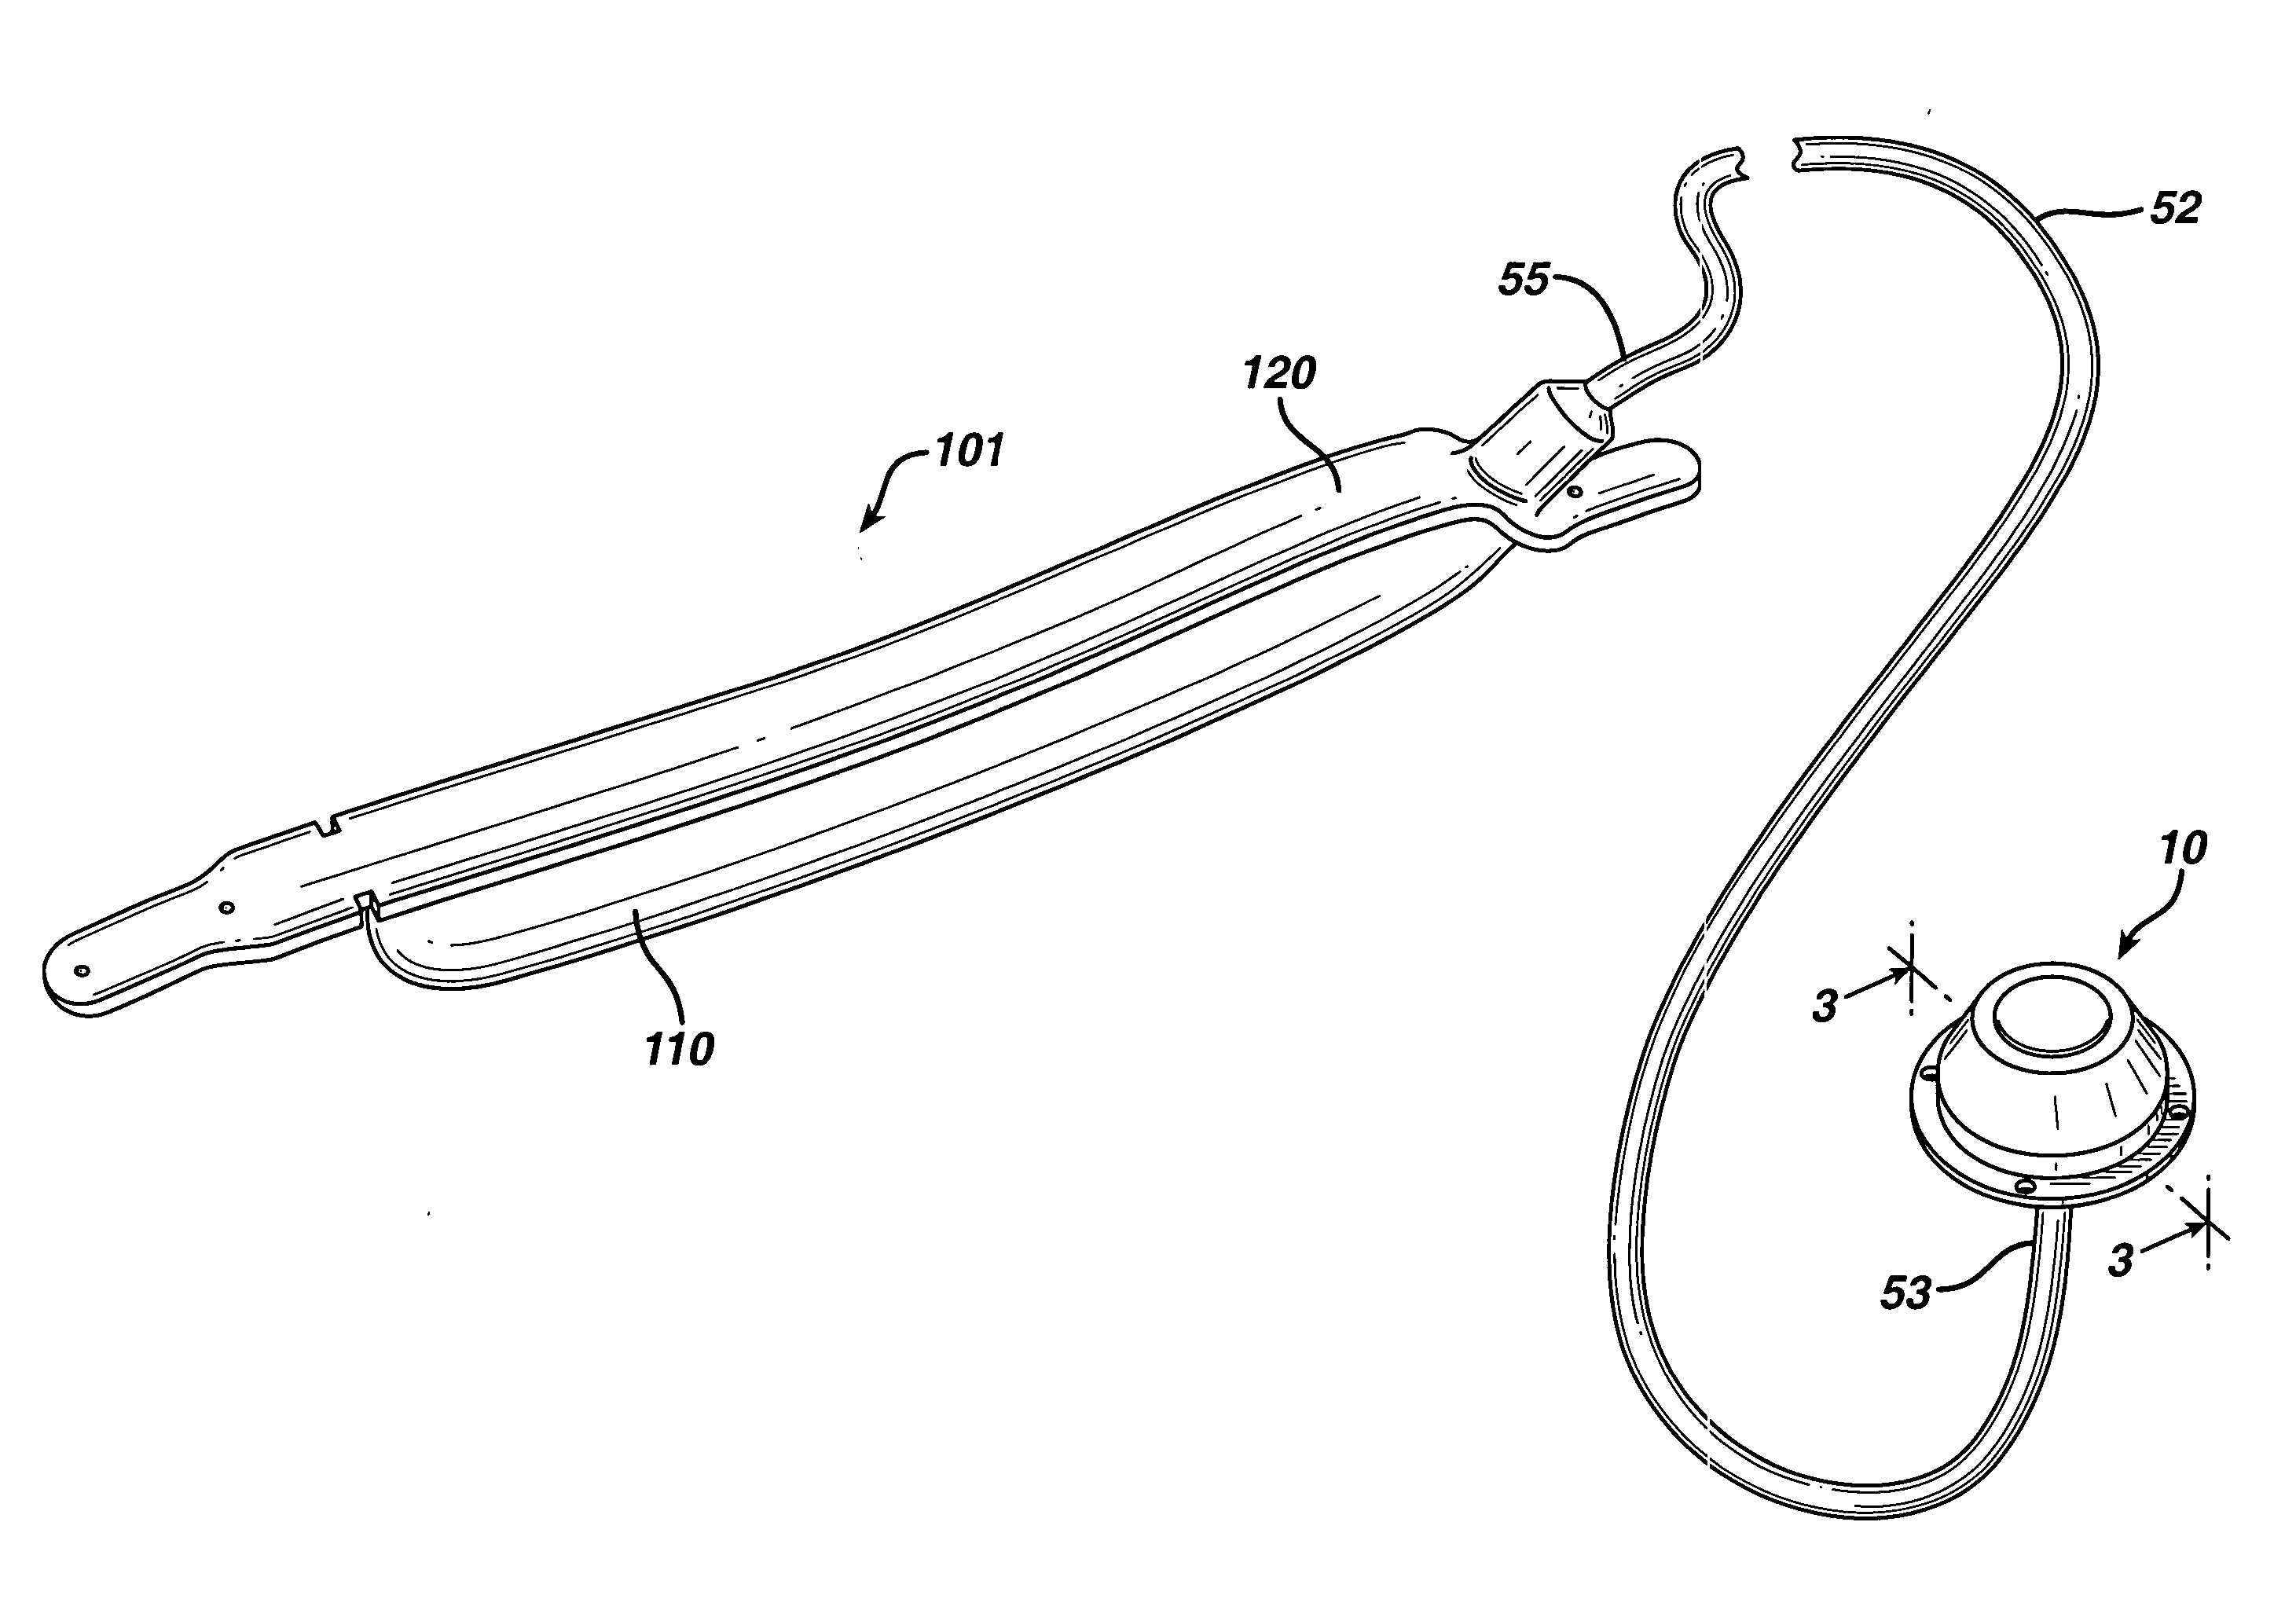 Method of implanting a fluid injection port